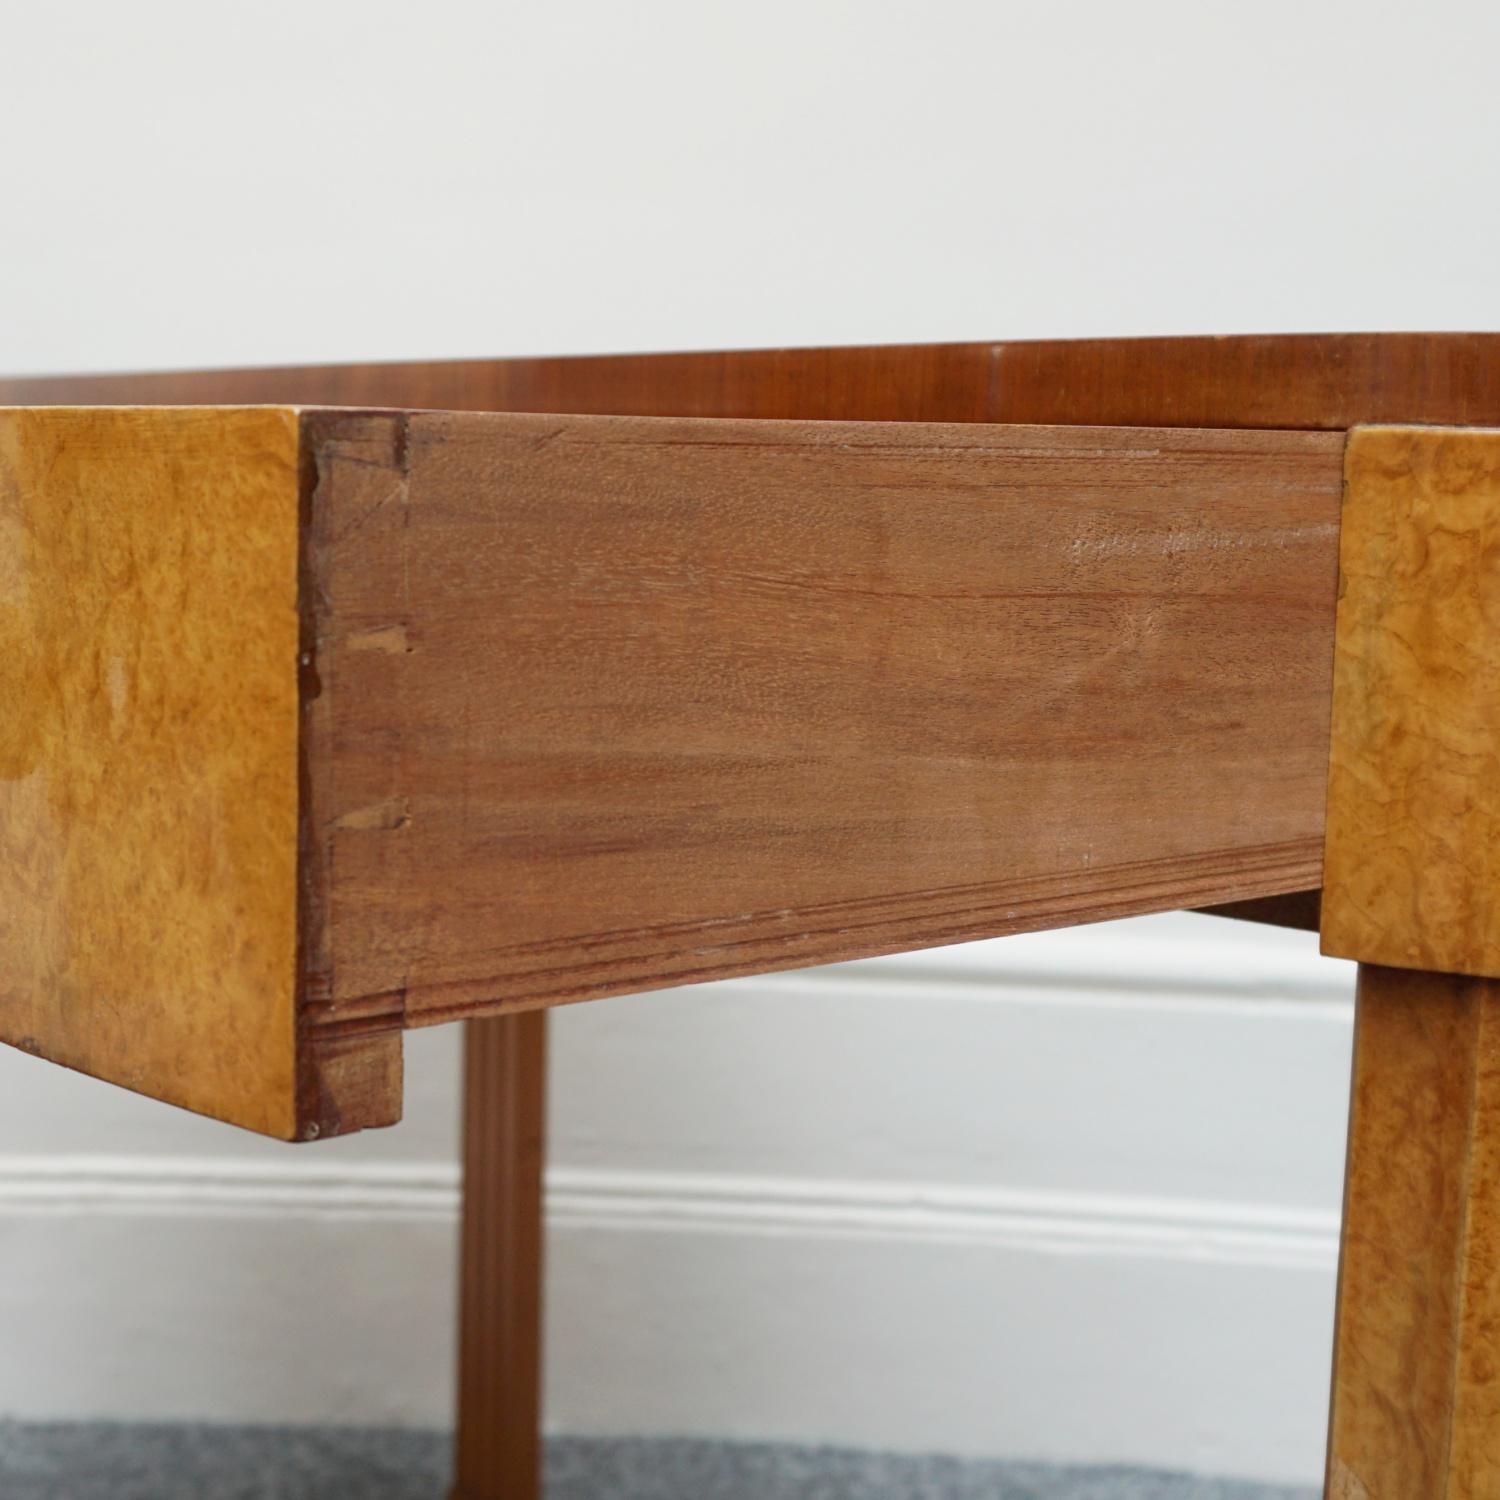 Original Art Deco Sideboard/Console Table in Burr and Figured Walnut For Sale 7